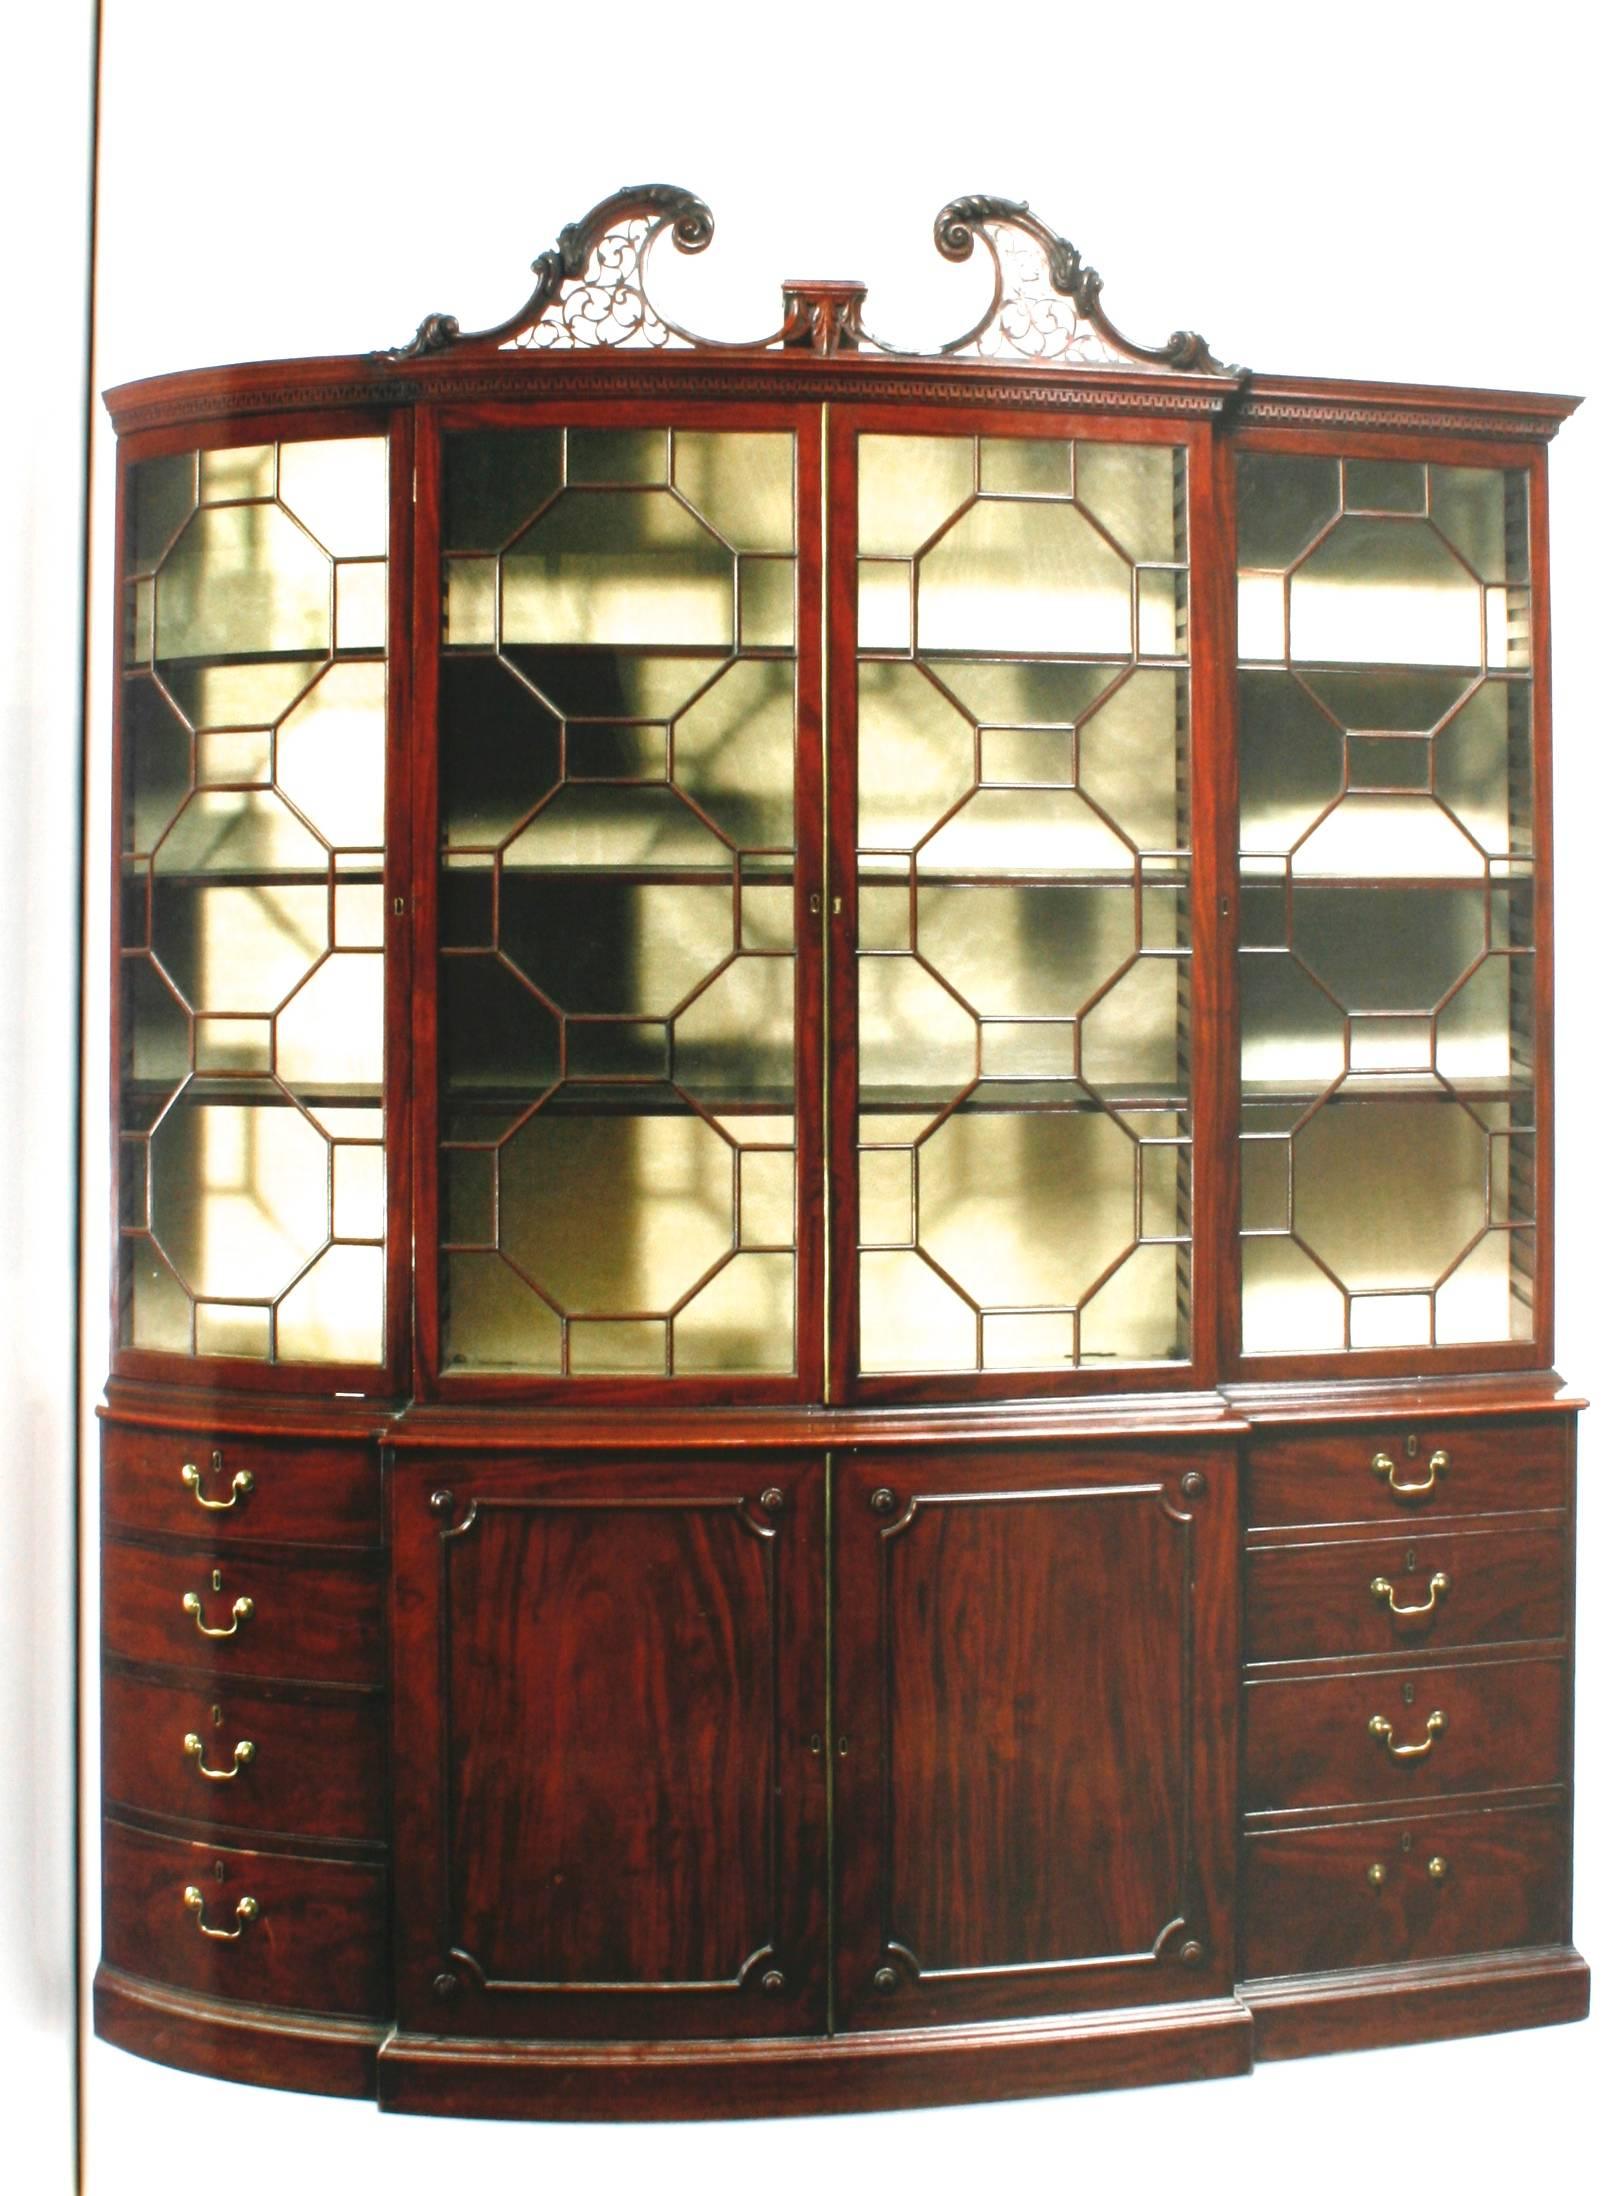 Sotheby's, Tom Devenish Collection of Important English Furniture, 2008 For Sale 2